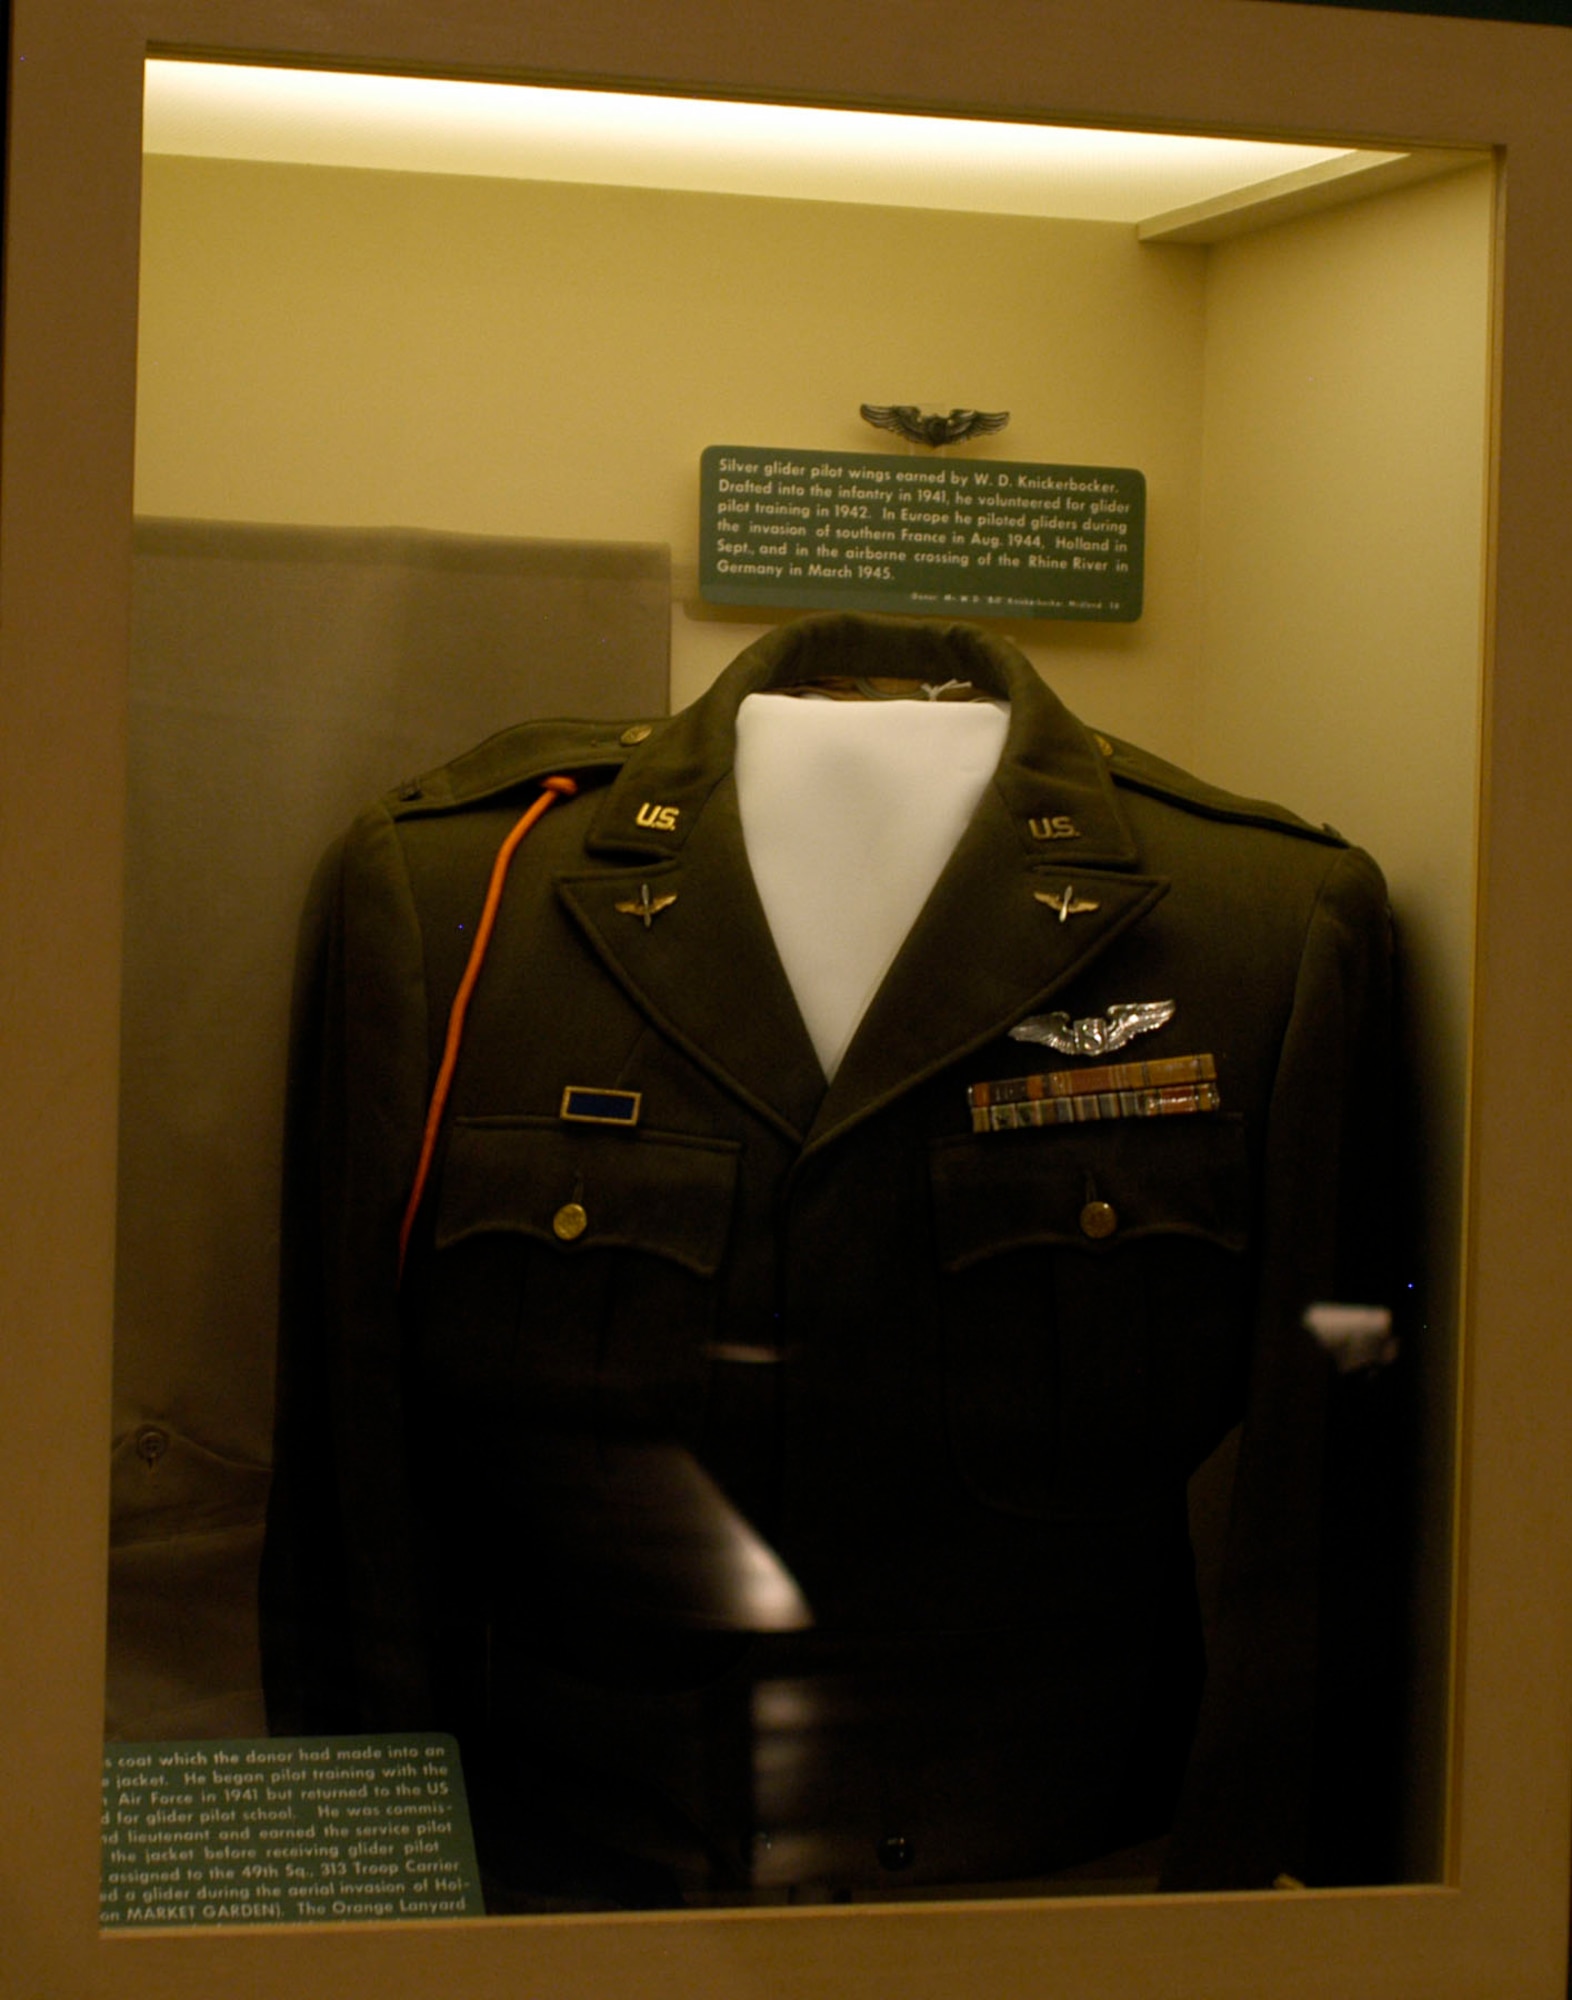 DAYTON, Ohio - Cadet issued dress coat on display in the World War II Gallery at the National Museum of the U.S. Air Force. (U.S. Air Force photo)